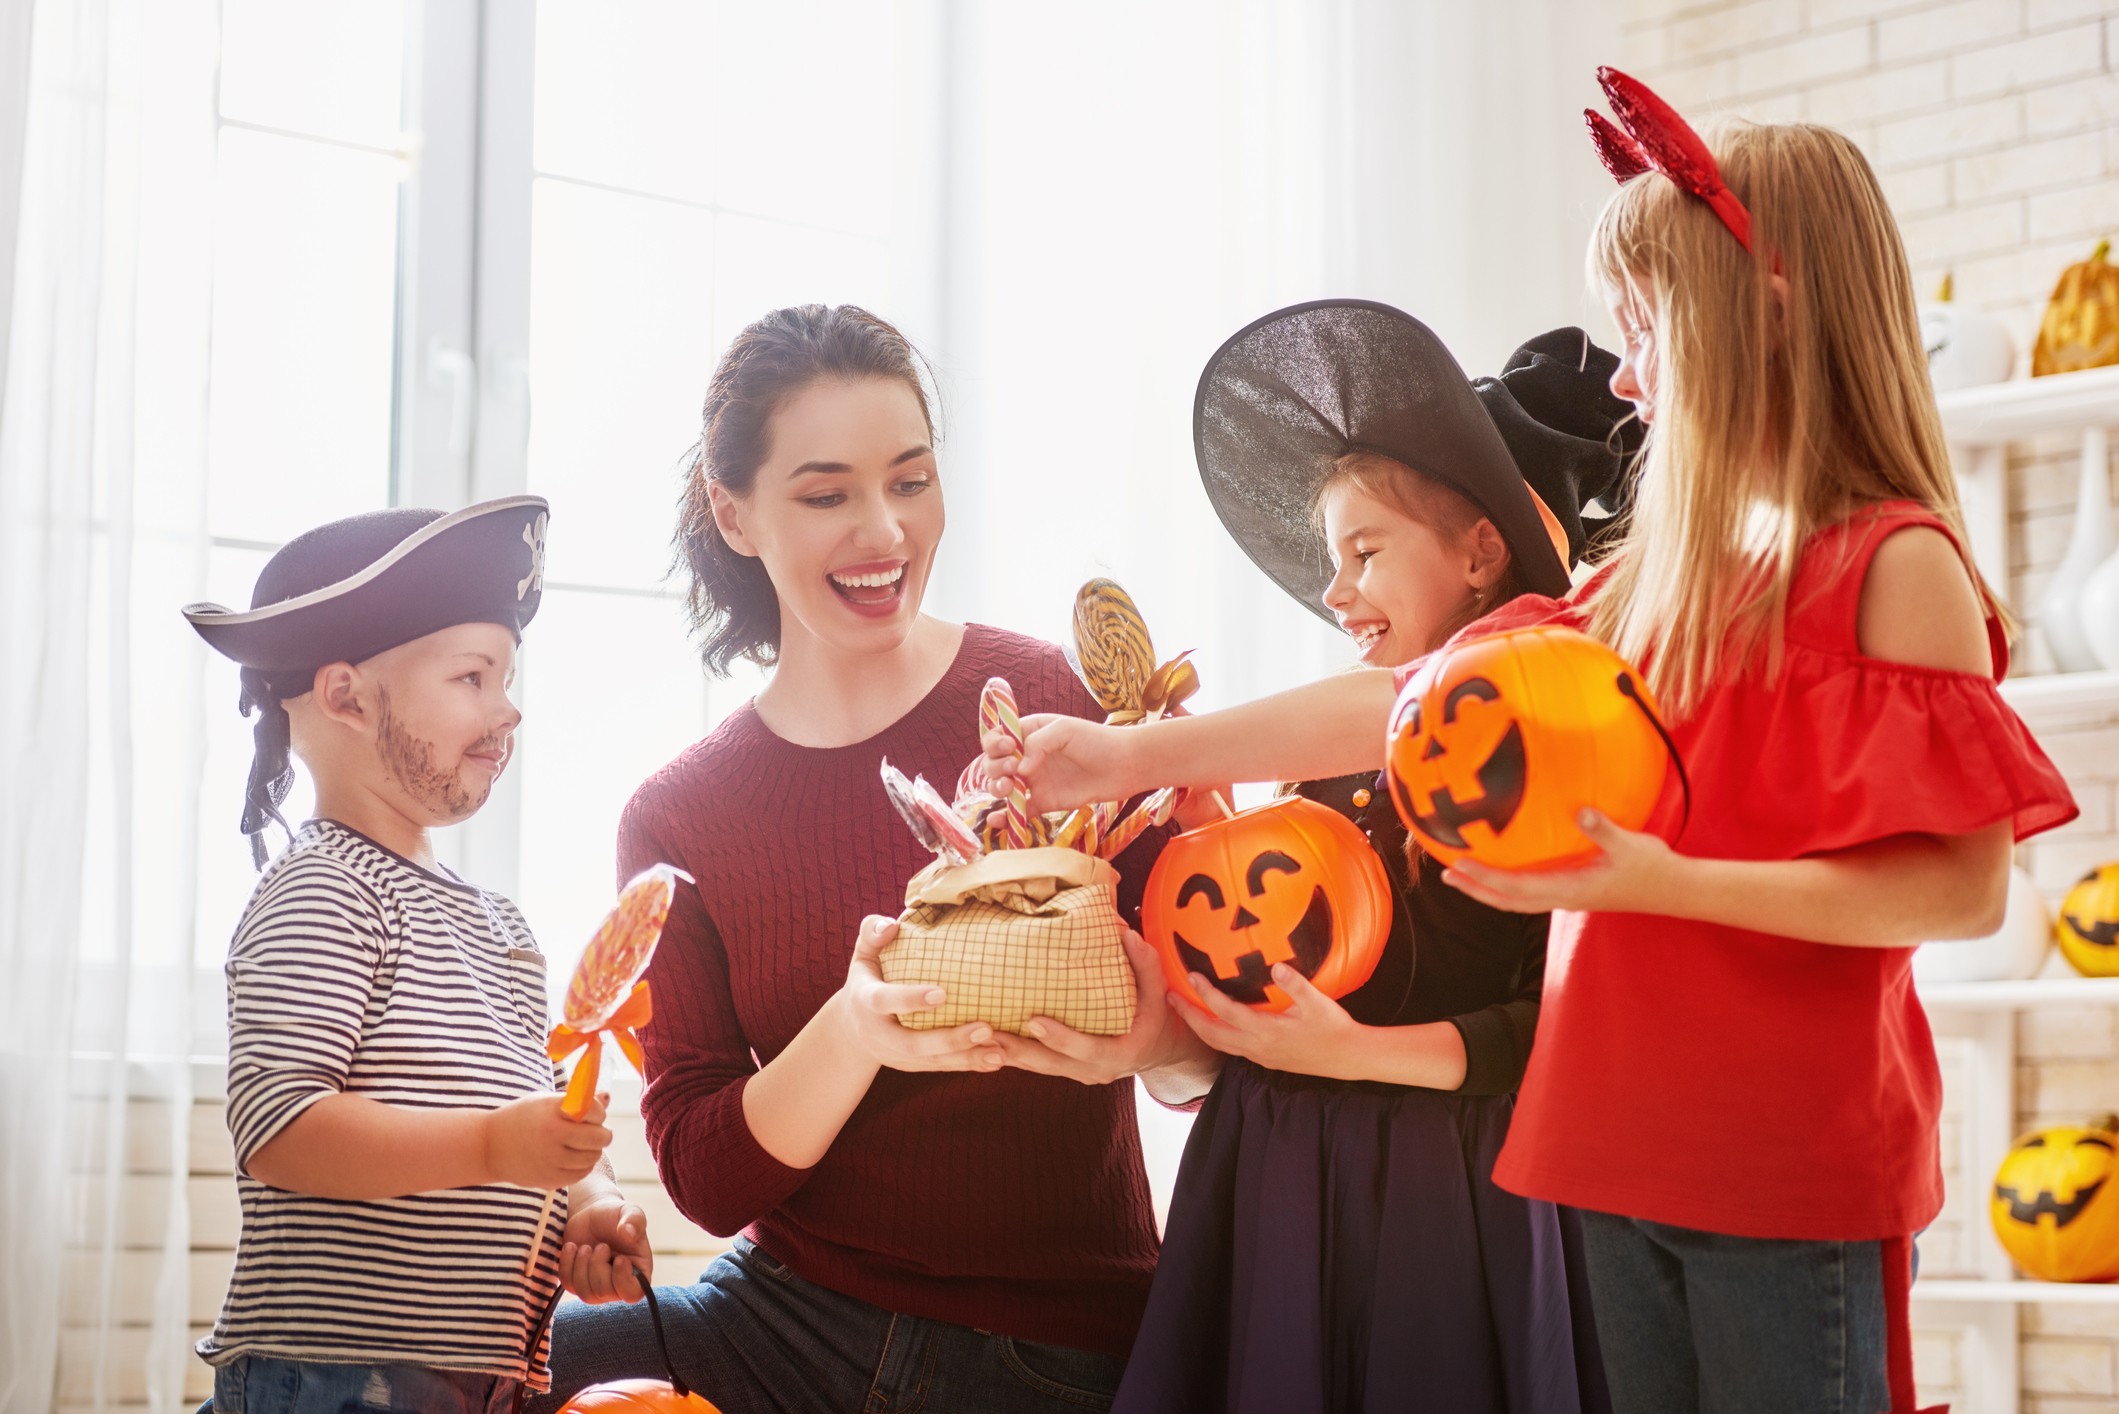 As Americans prepare for Halloween, NCA issues expert guidance on ...